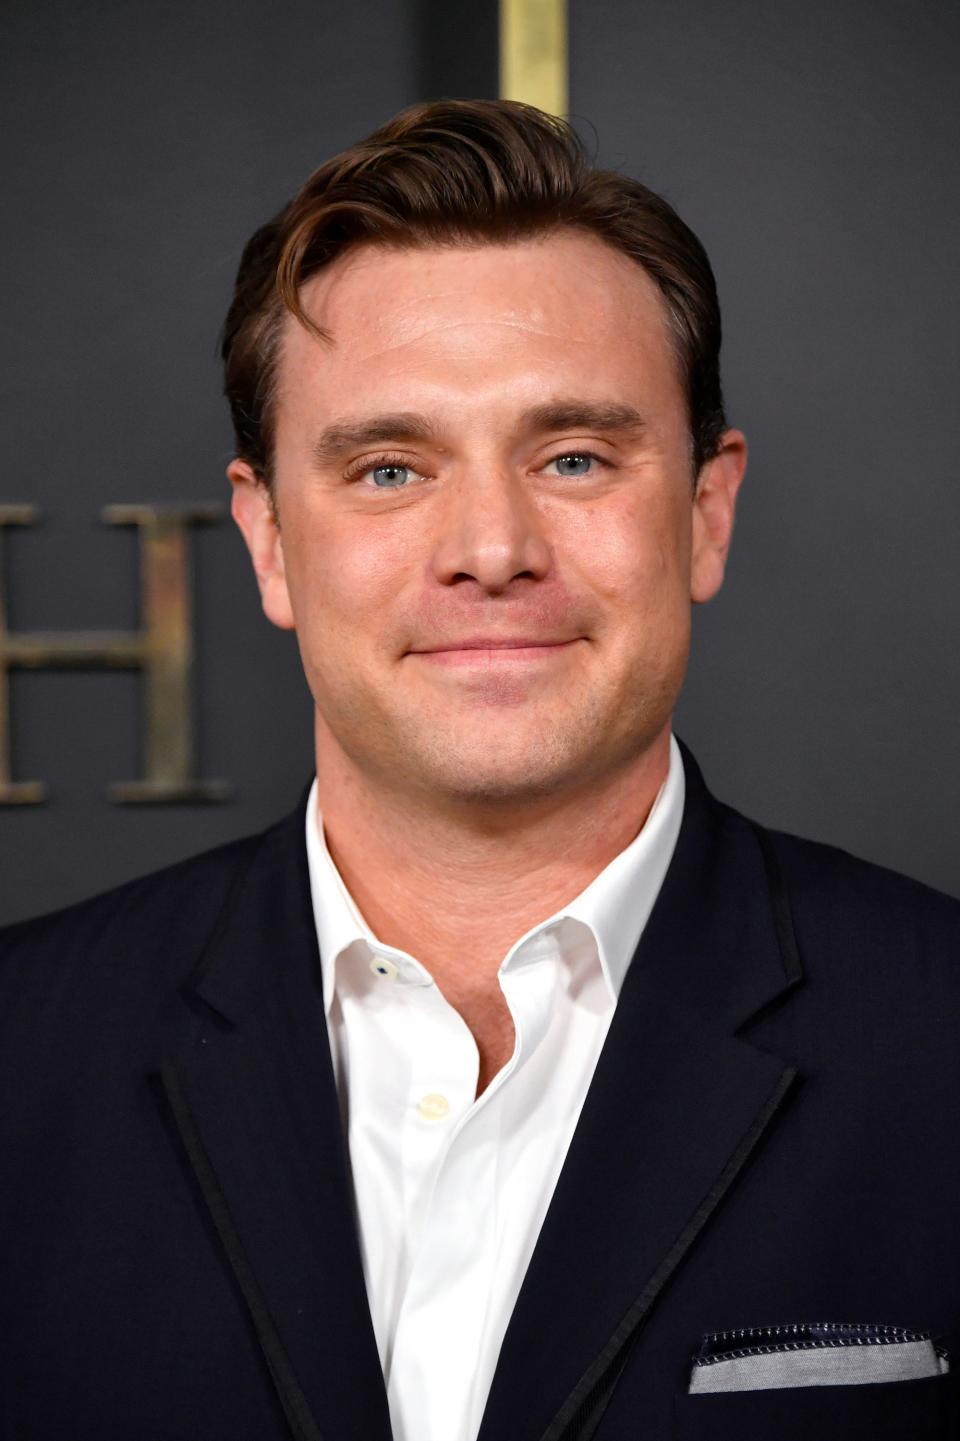 Billy Miller won three Daytime Emmy Awards for his role on "The Young and the Restless."